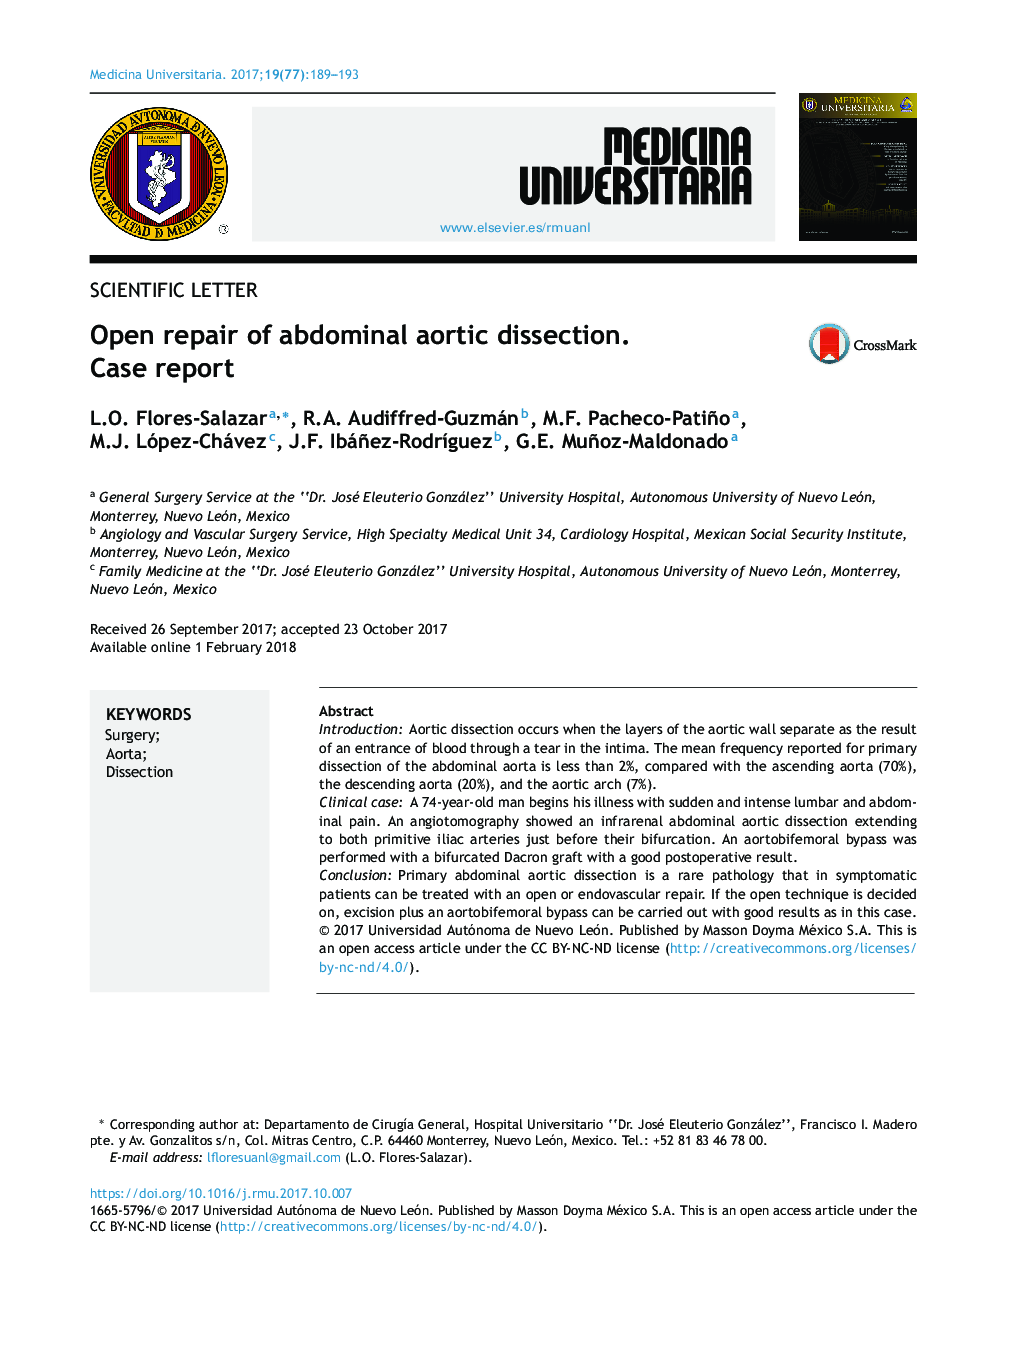 Open repair of abdominal aortic dissection. Case report